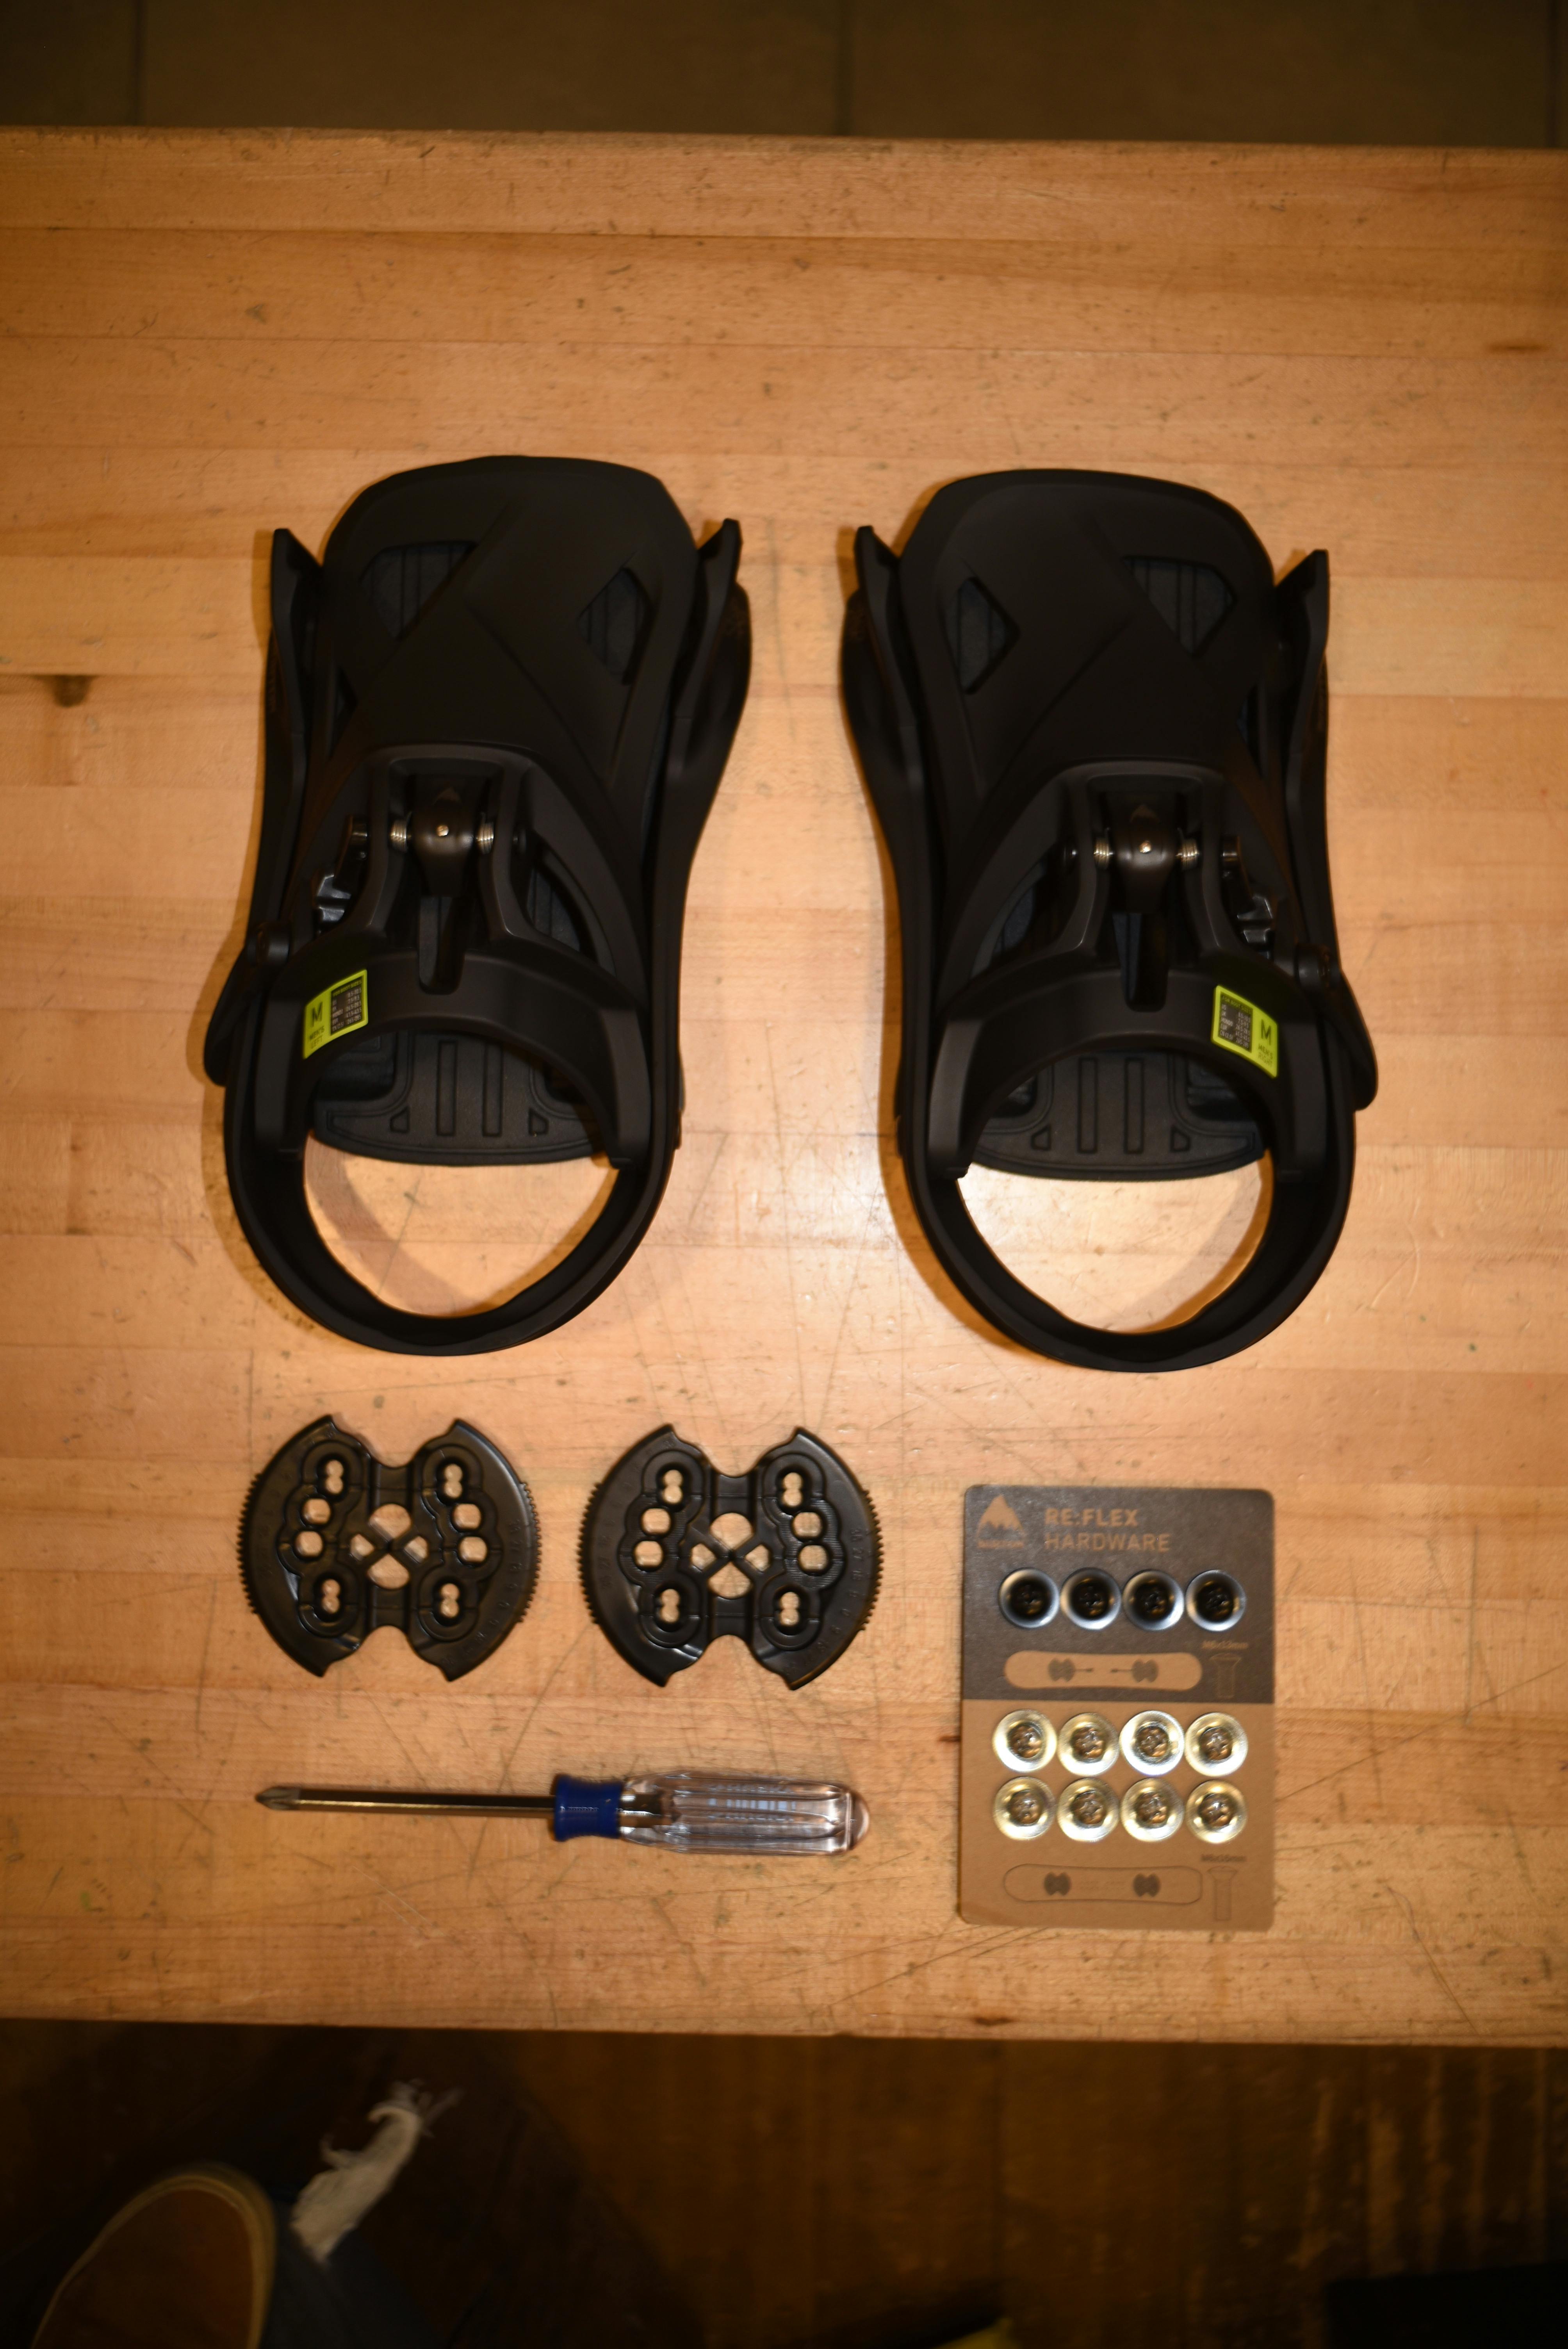 A pair of black snowboard bindings and the hardware required to mount them